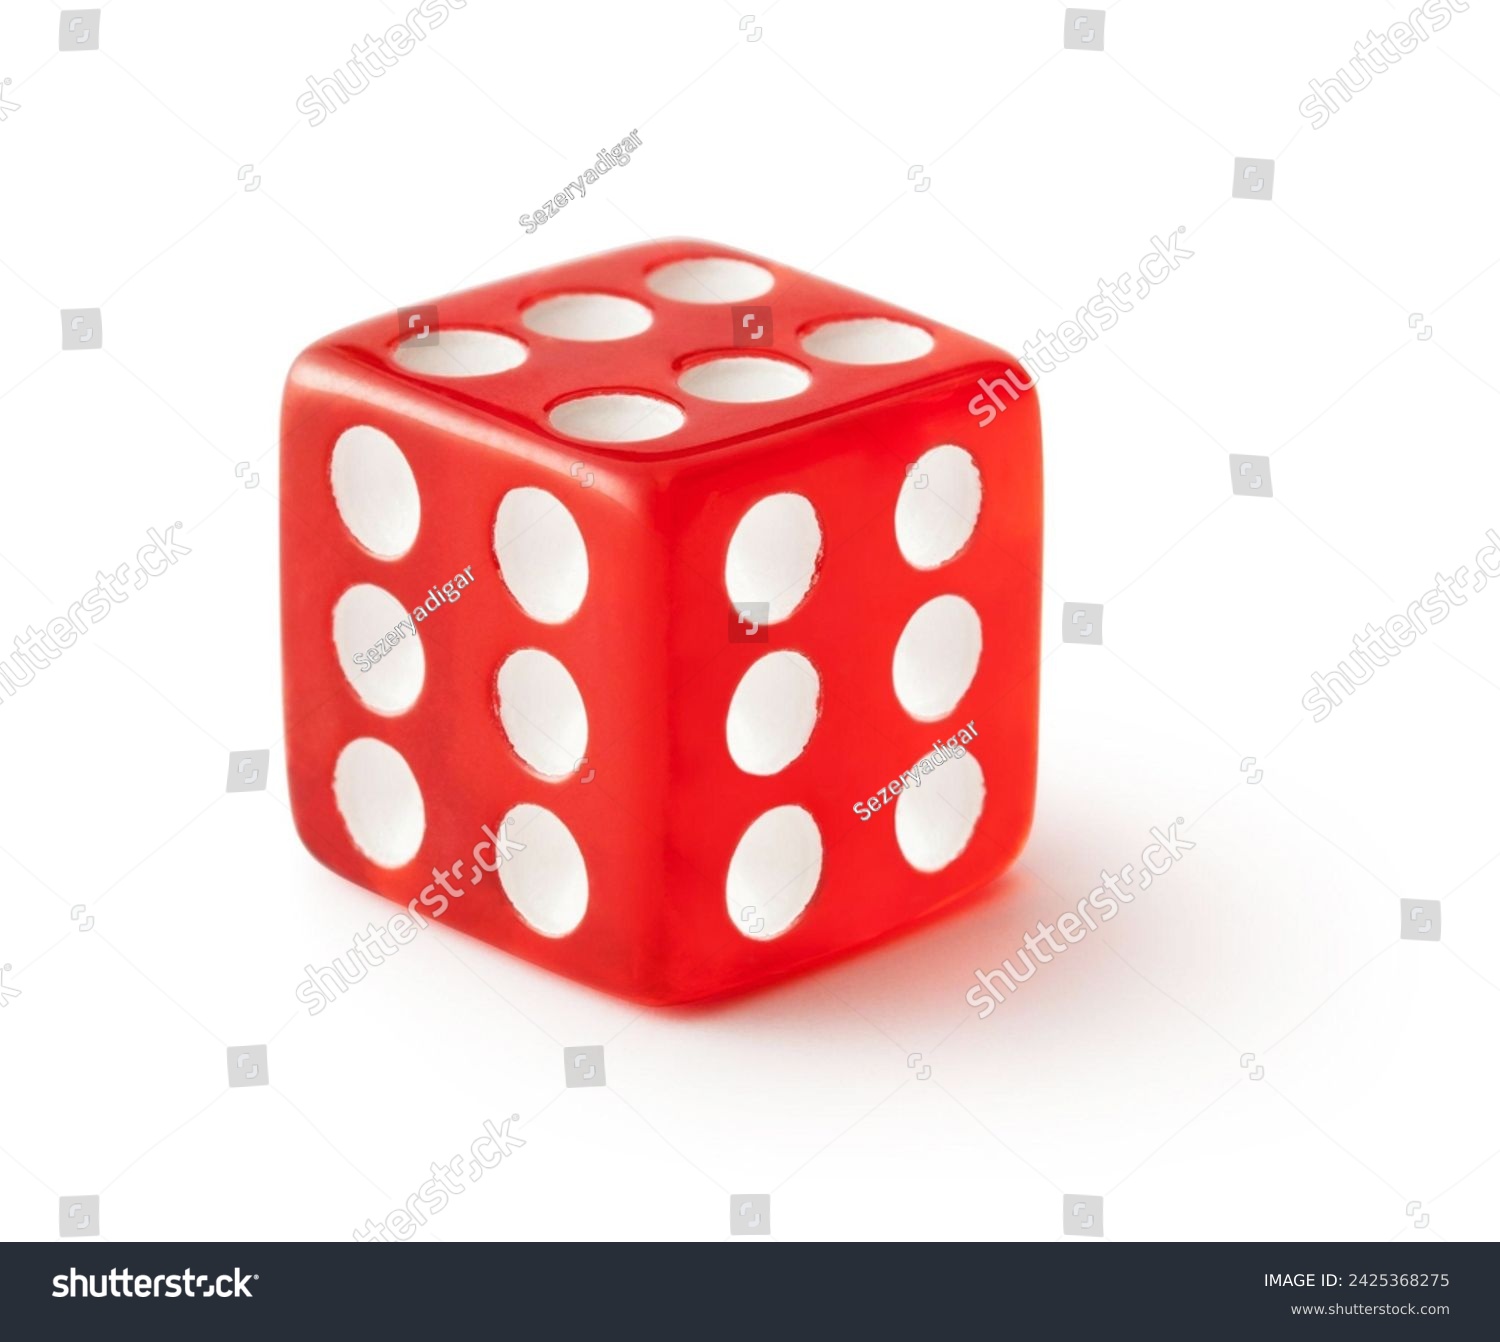 Red Dice with clipping paths abstract white background #2425368275